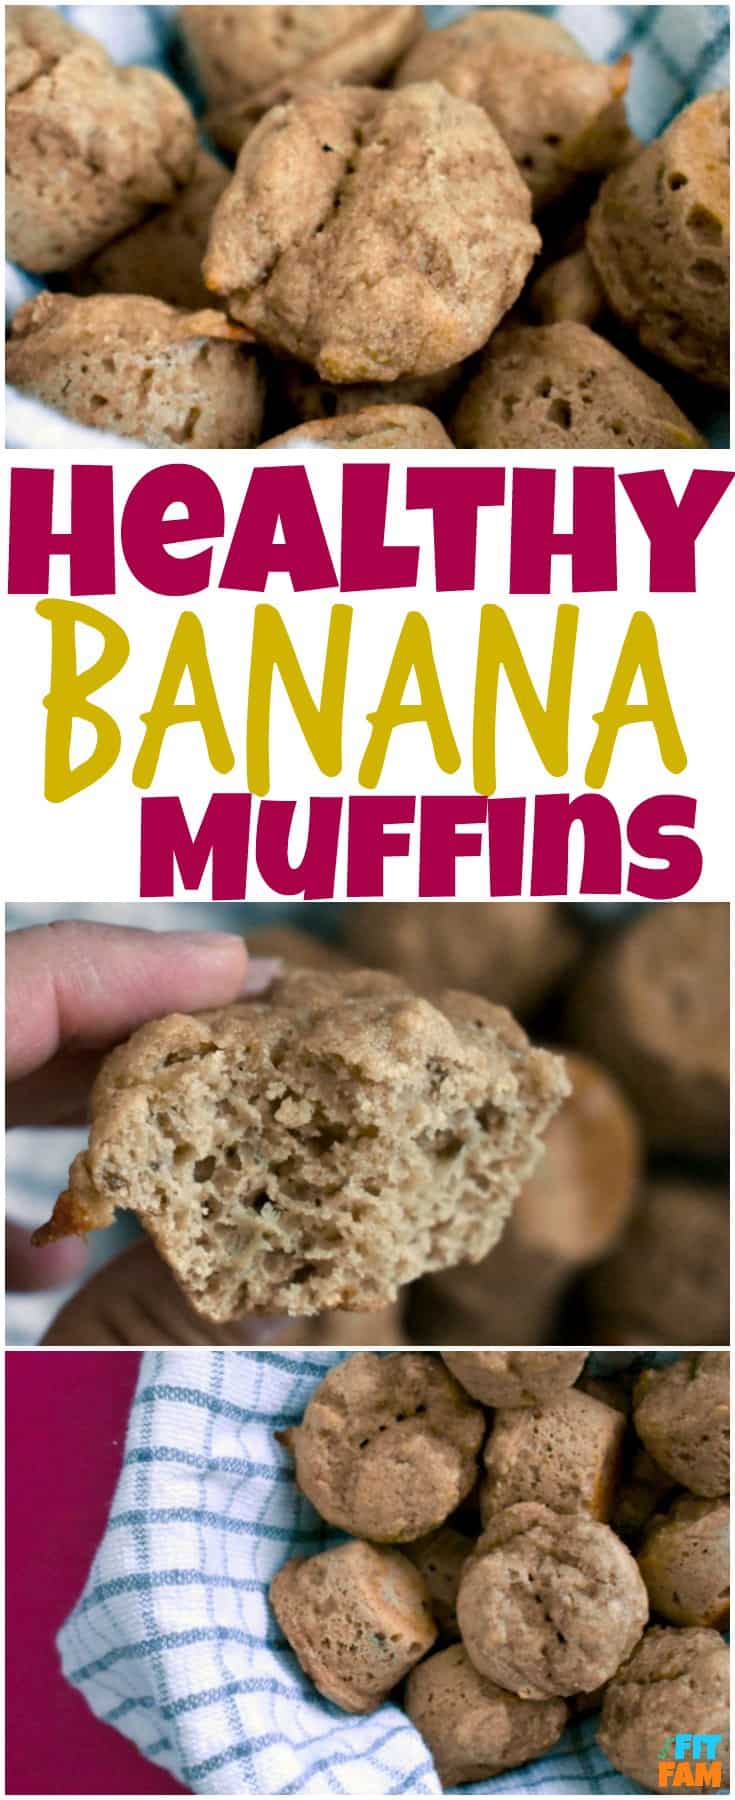 healthy kodiak cakes banana muffins are so moist and yummy! perfect on the go breakfast! my whole family LOVES them!